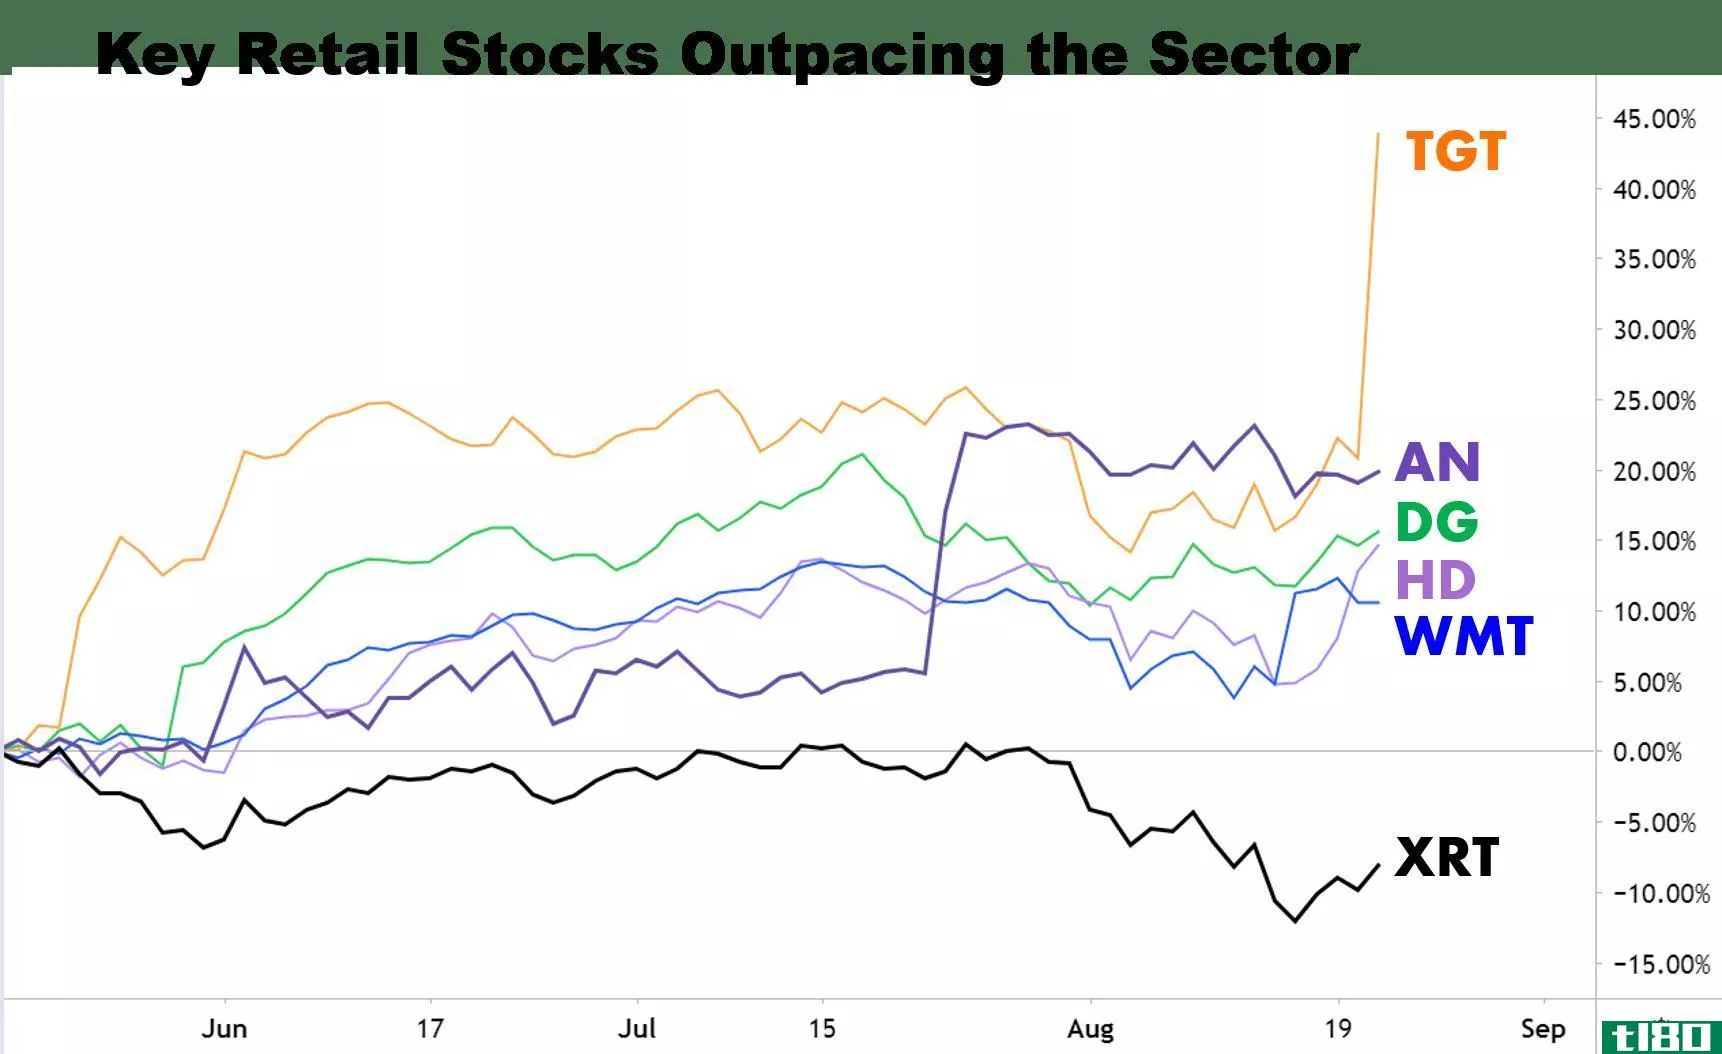 Chart showing the outperformance of numerous retail stocks vs. the sector fund